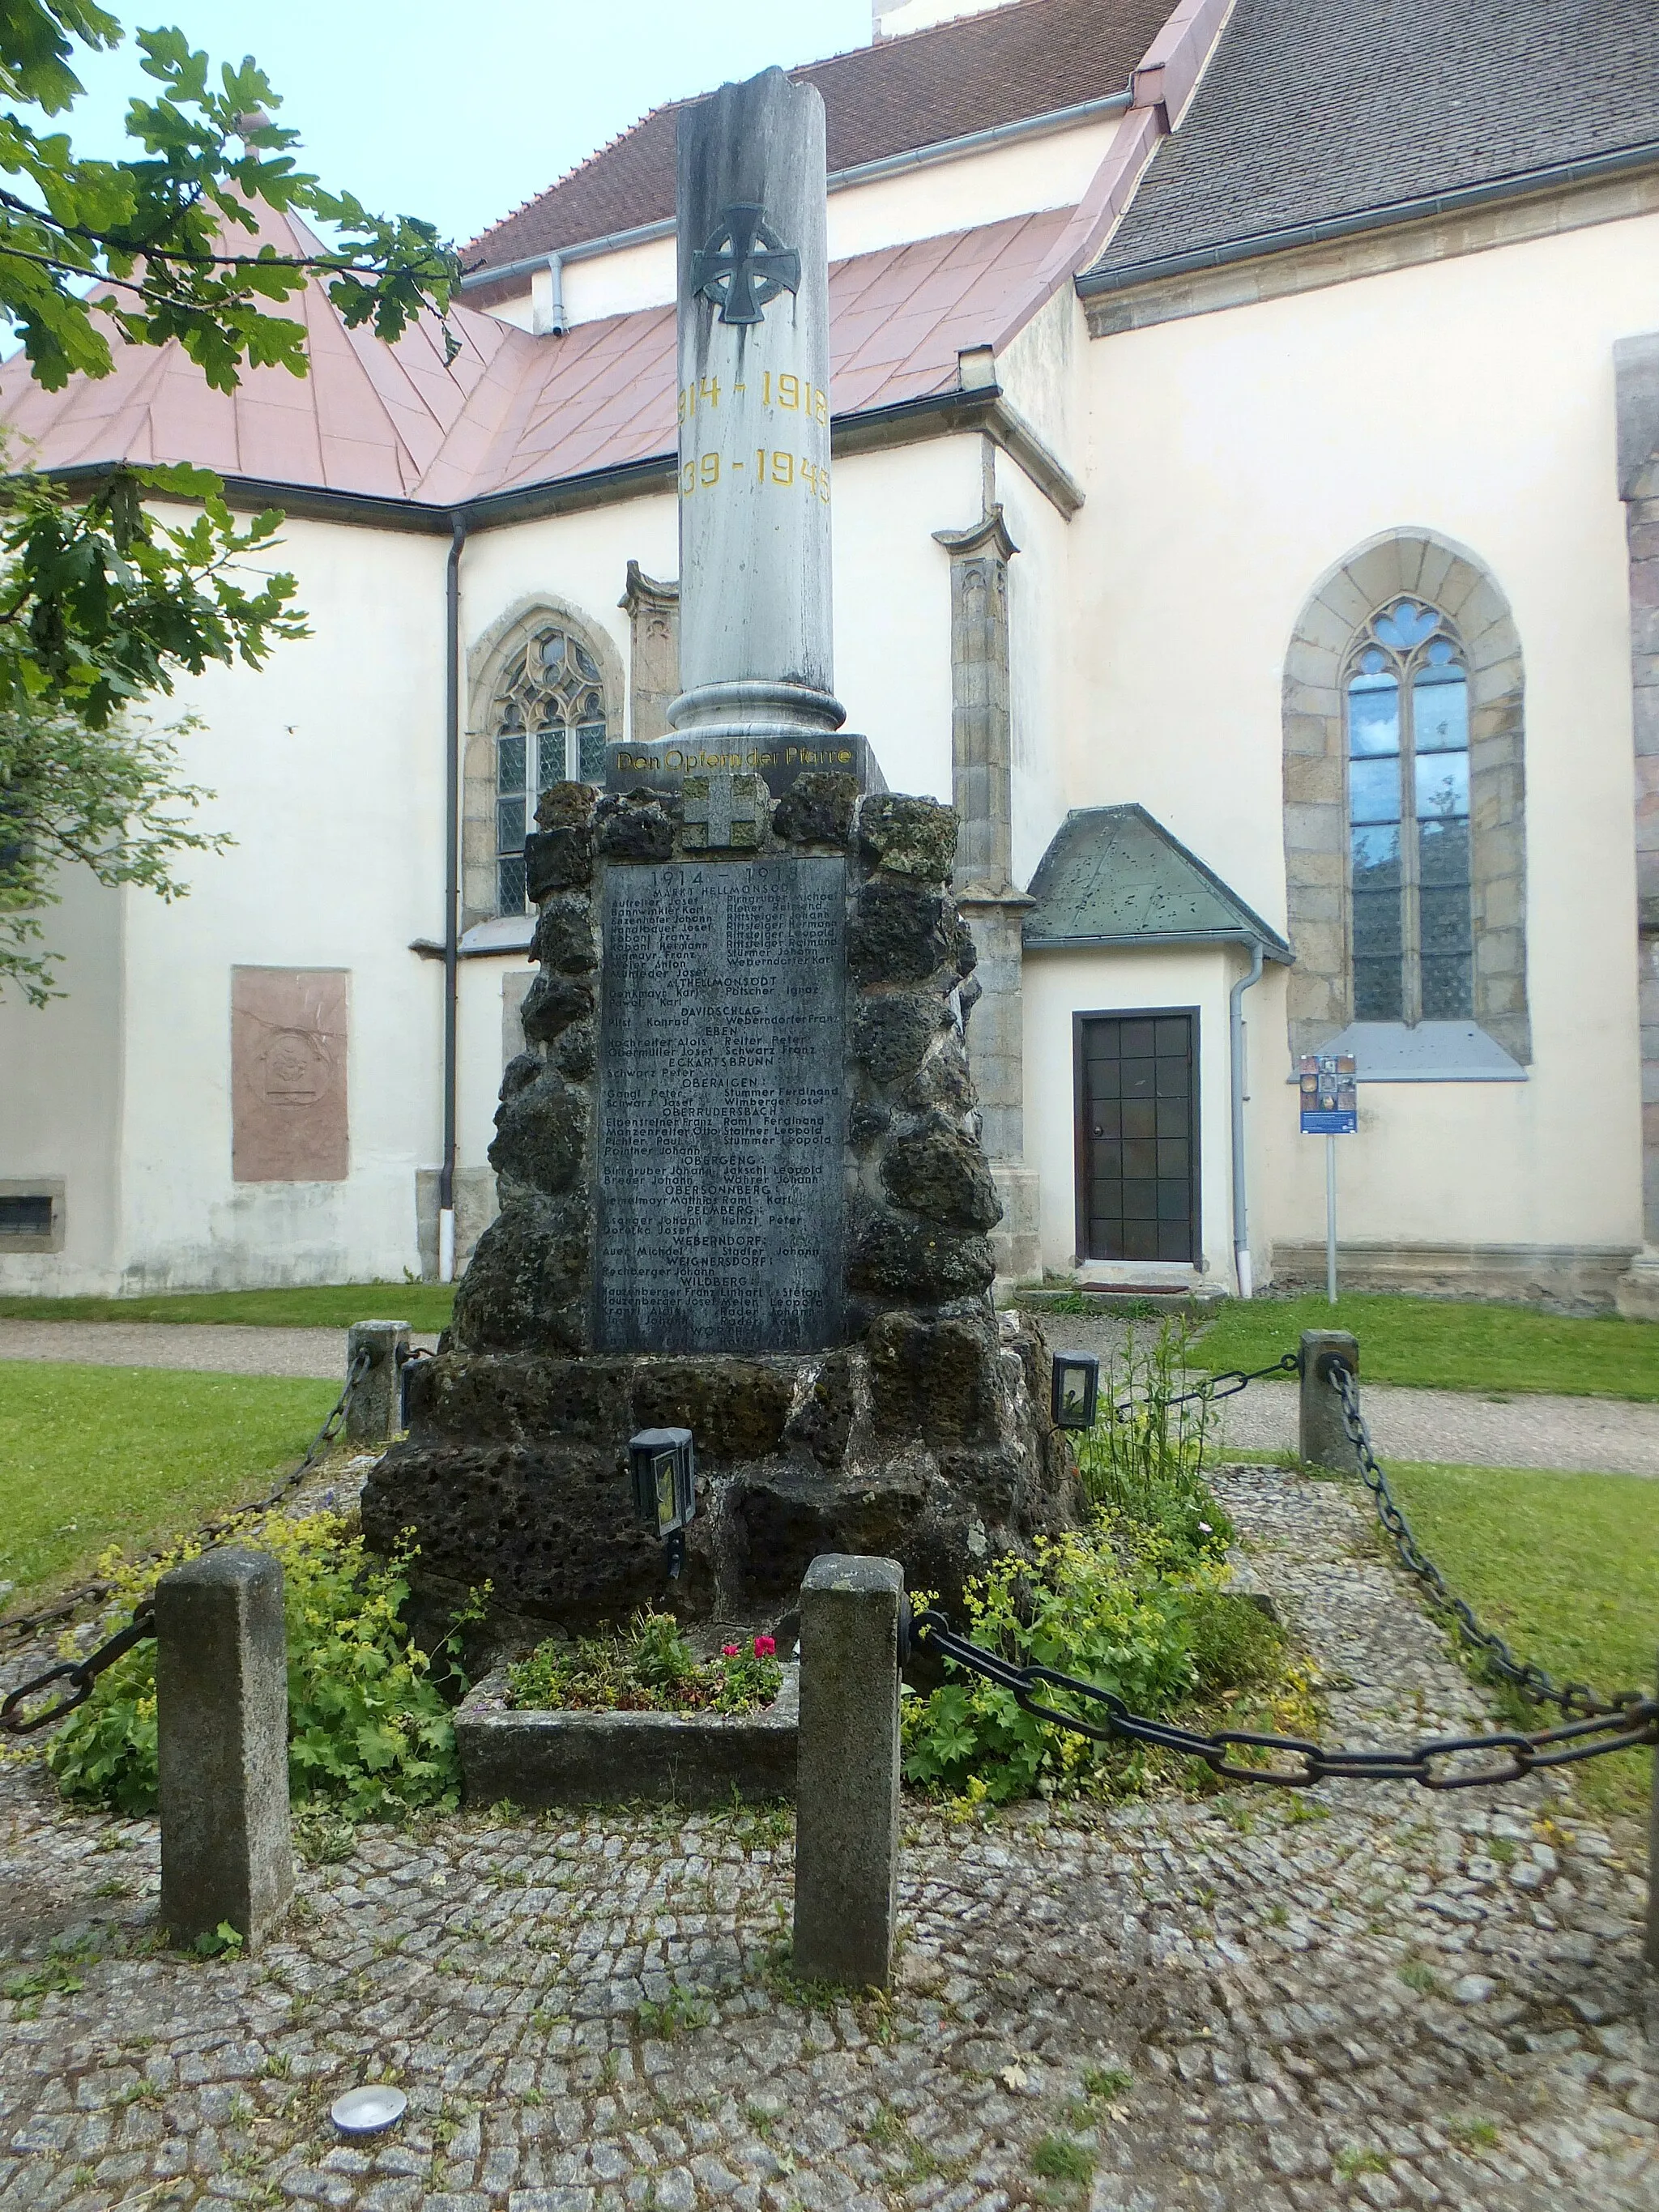 Photo showing: Memorial of victims of World Wars in Hellmonsödt